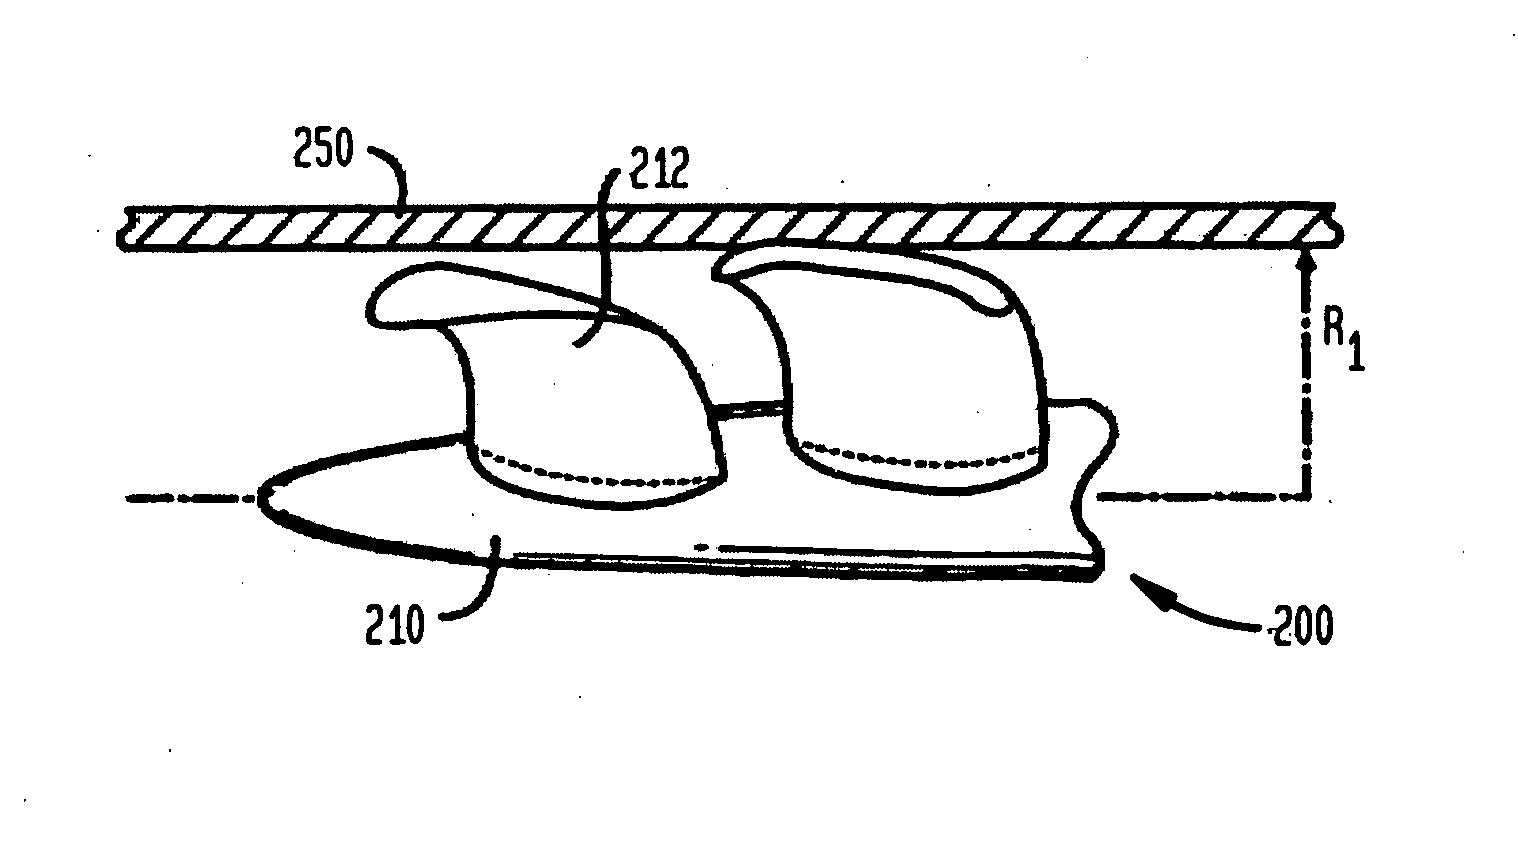 Heart assist device with expandable impeller pump